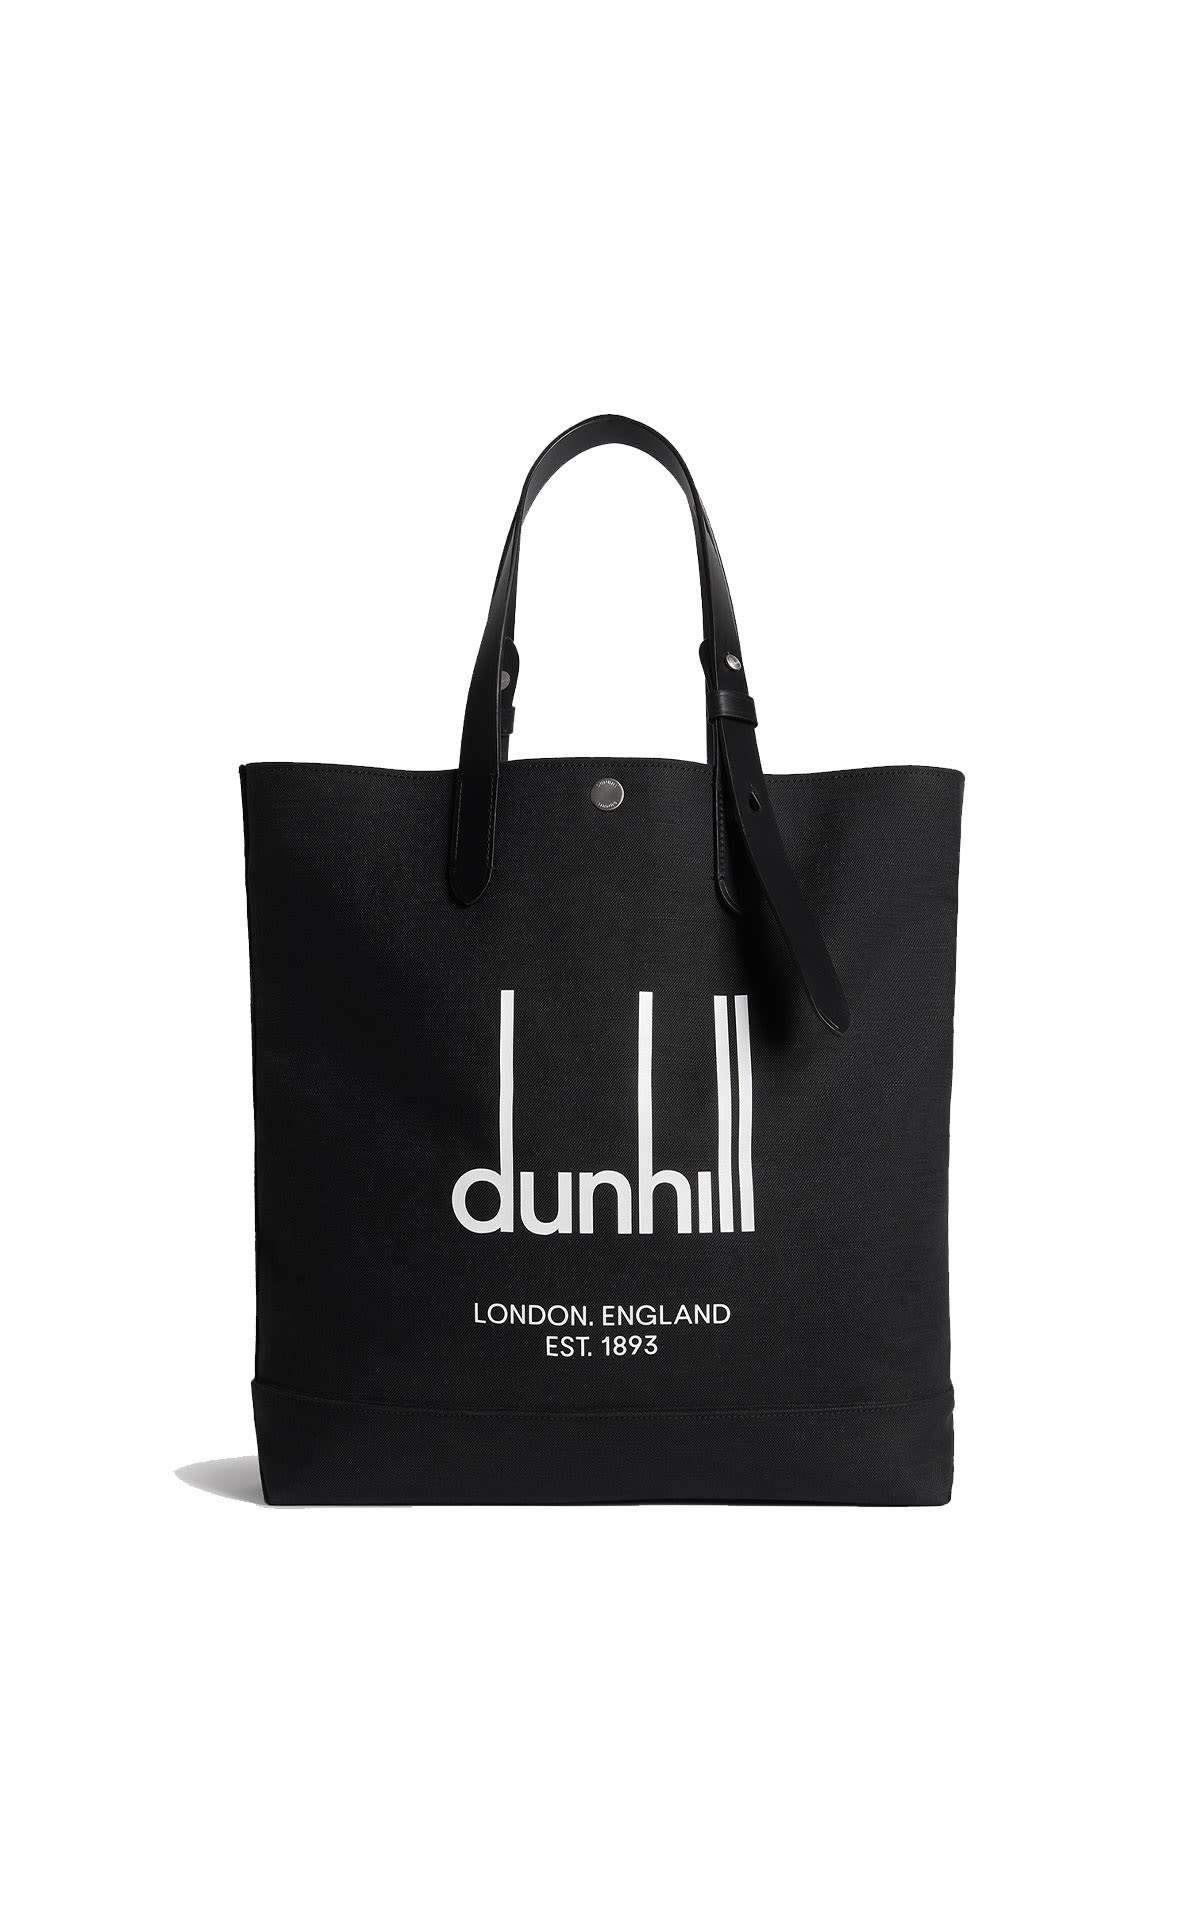 dunhill Legacy north south tote bag black from Bicester Village